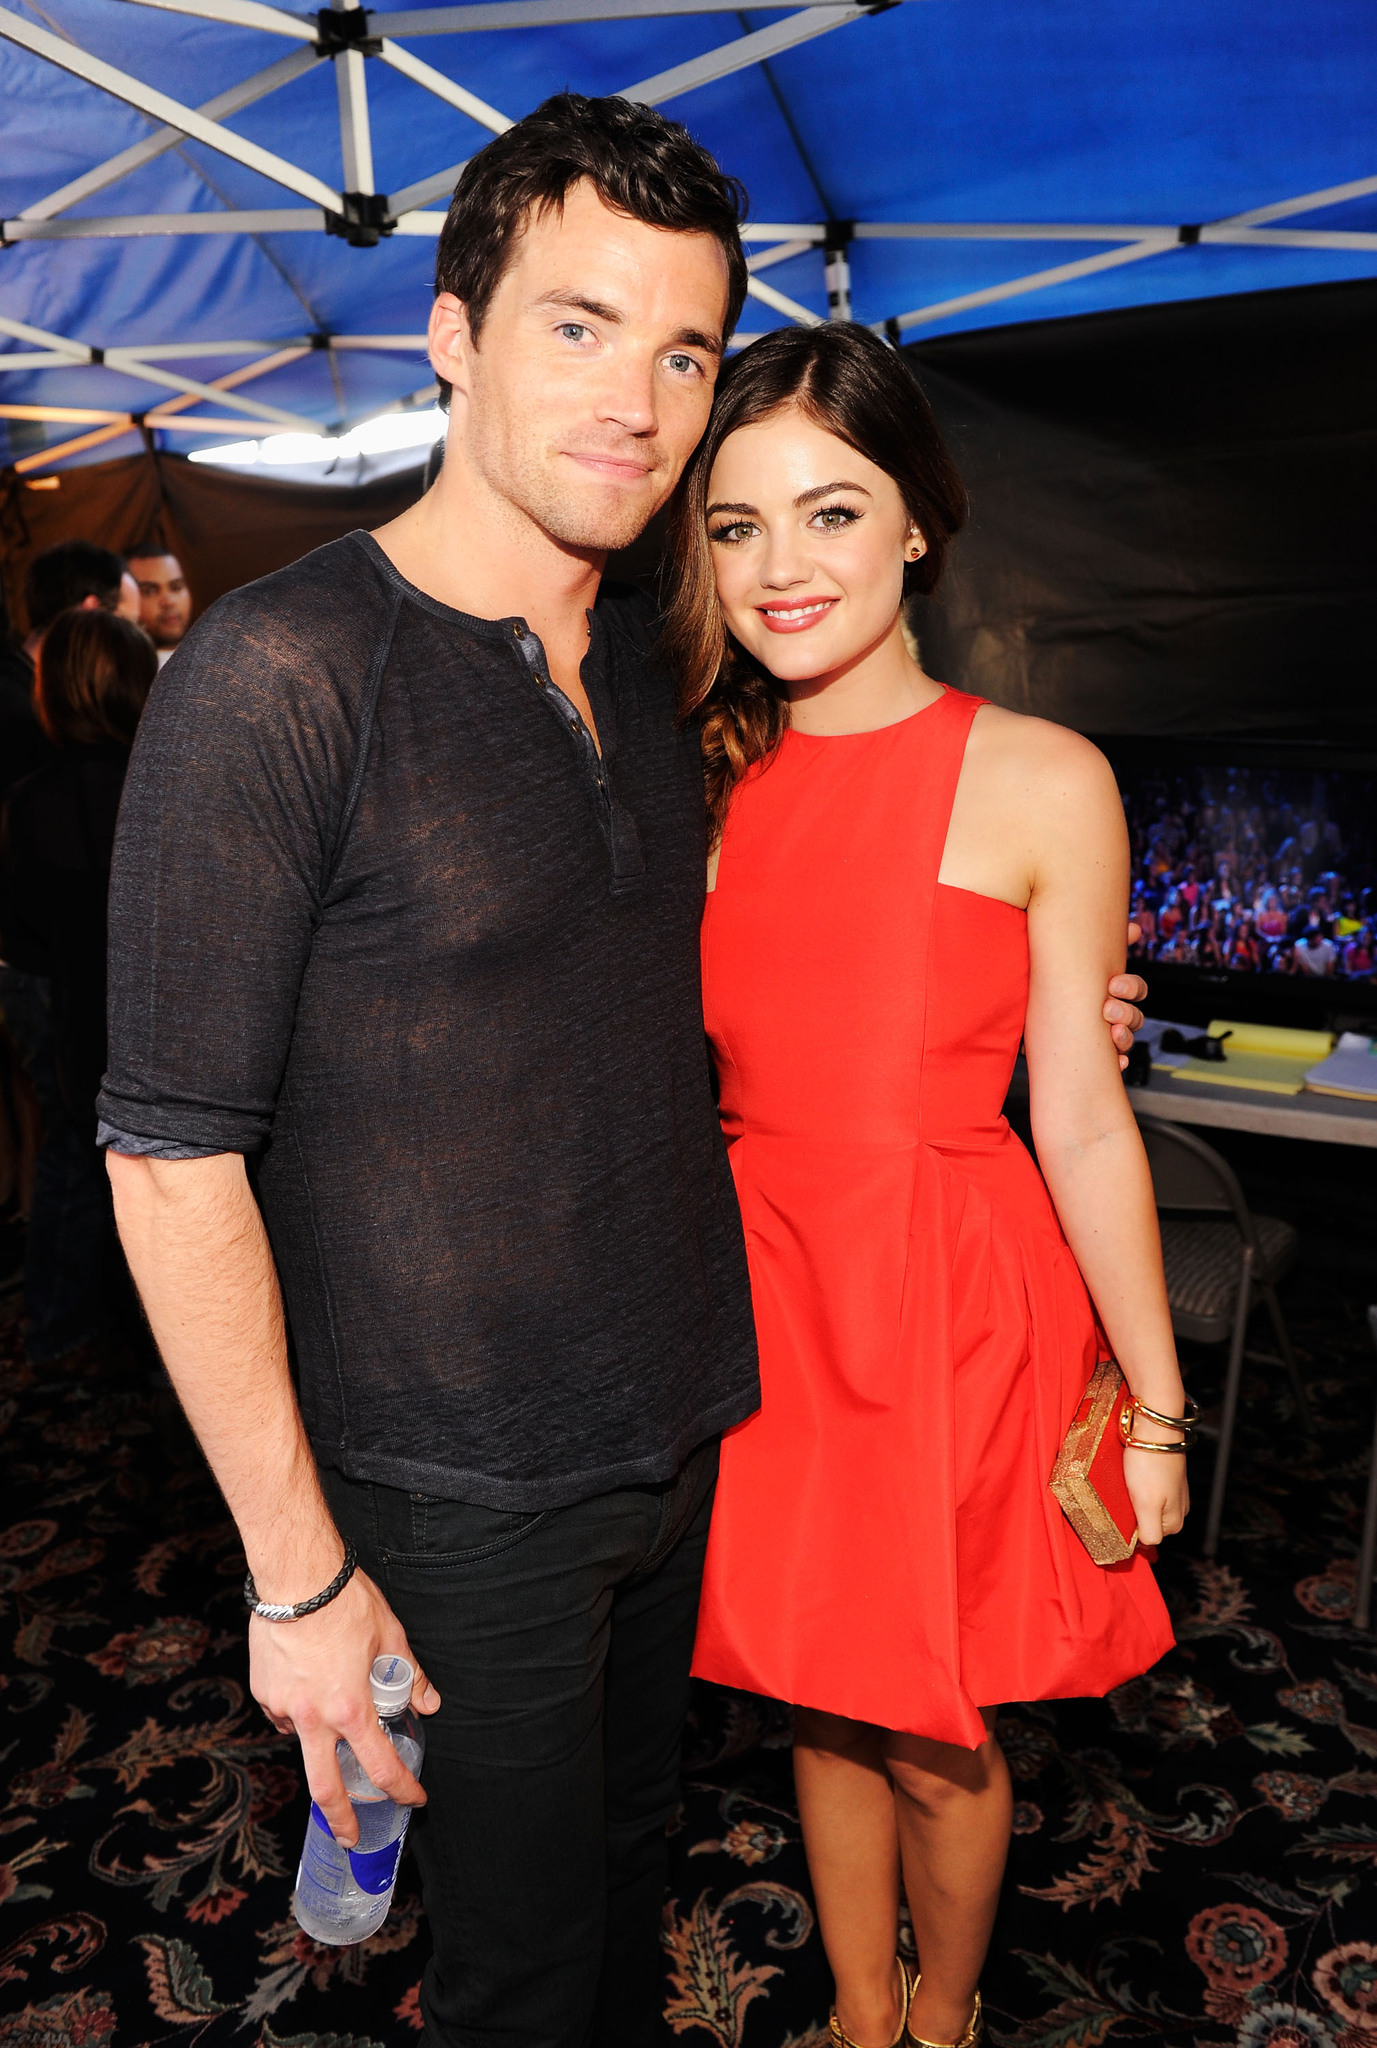 Lucy Hale and Ian Harding at event of Teen Choice Awards 2012 (2012)